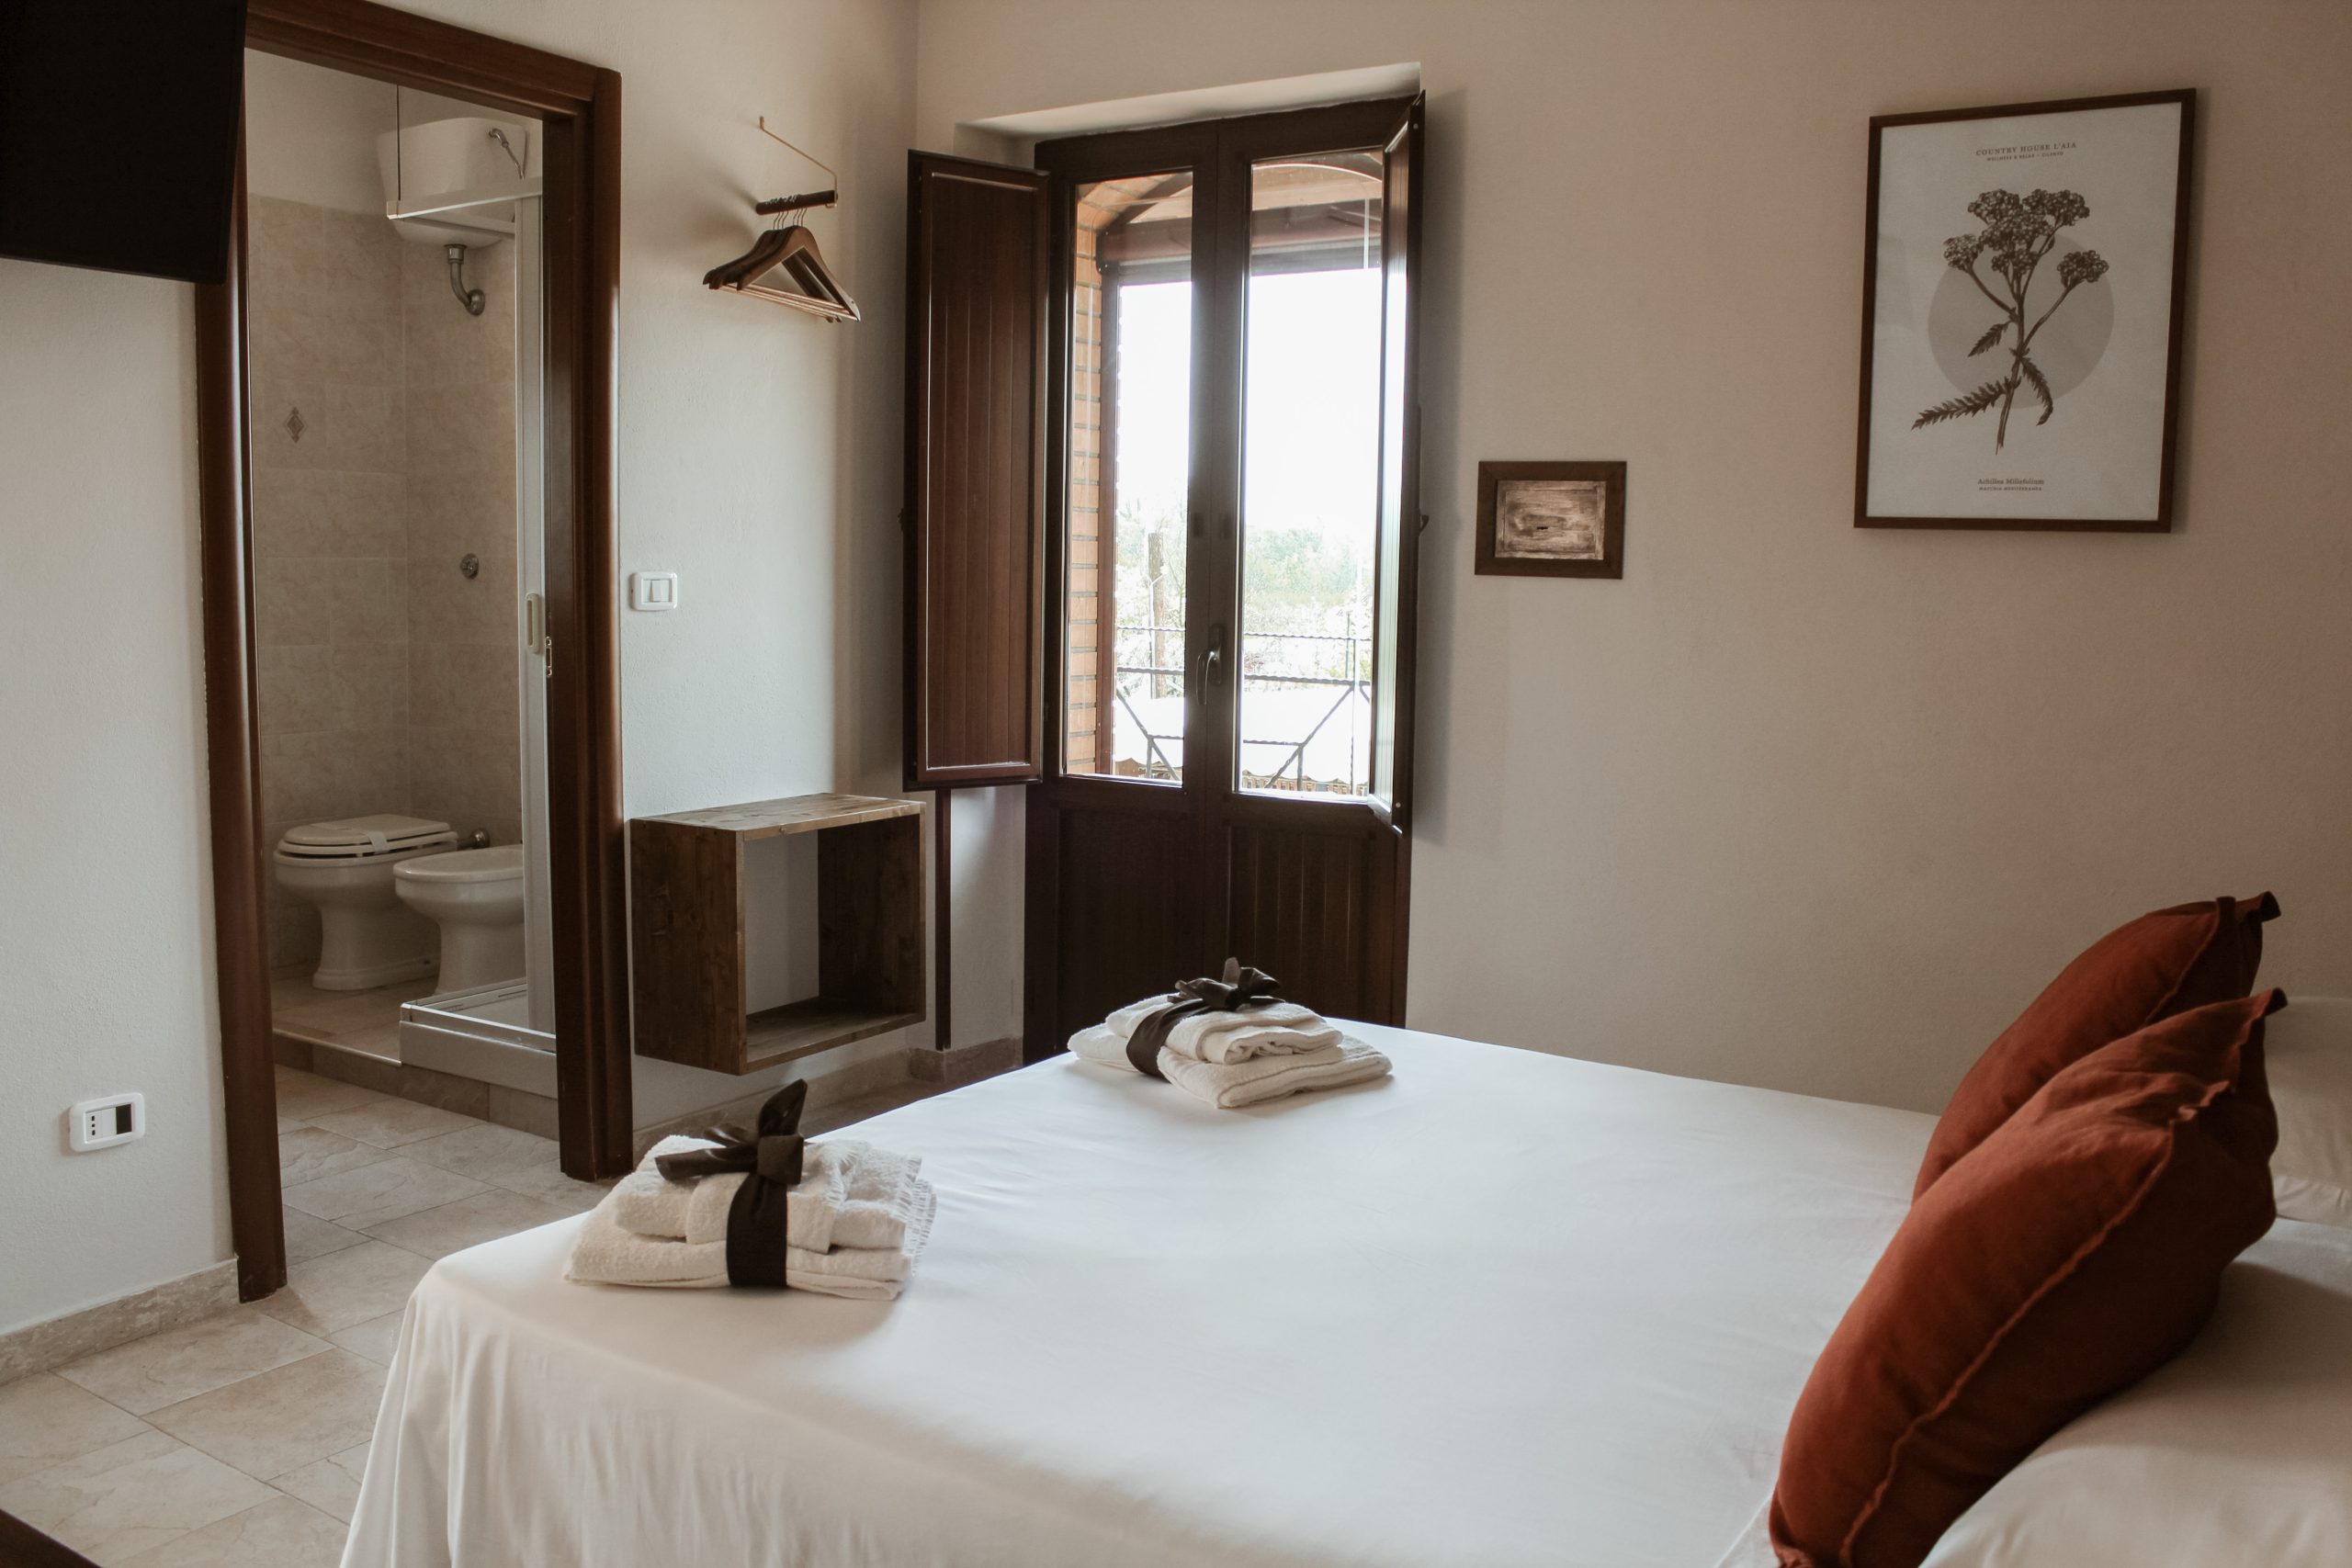 Le camere del Country House L'Aia